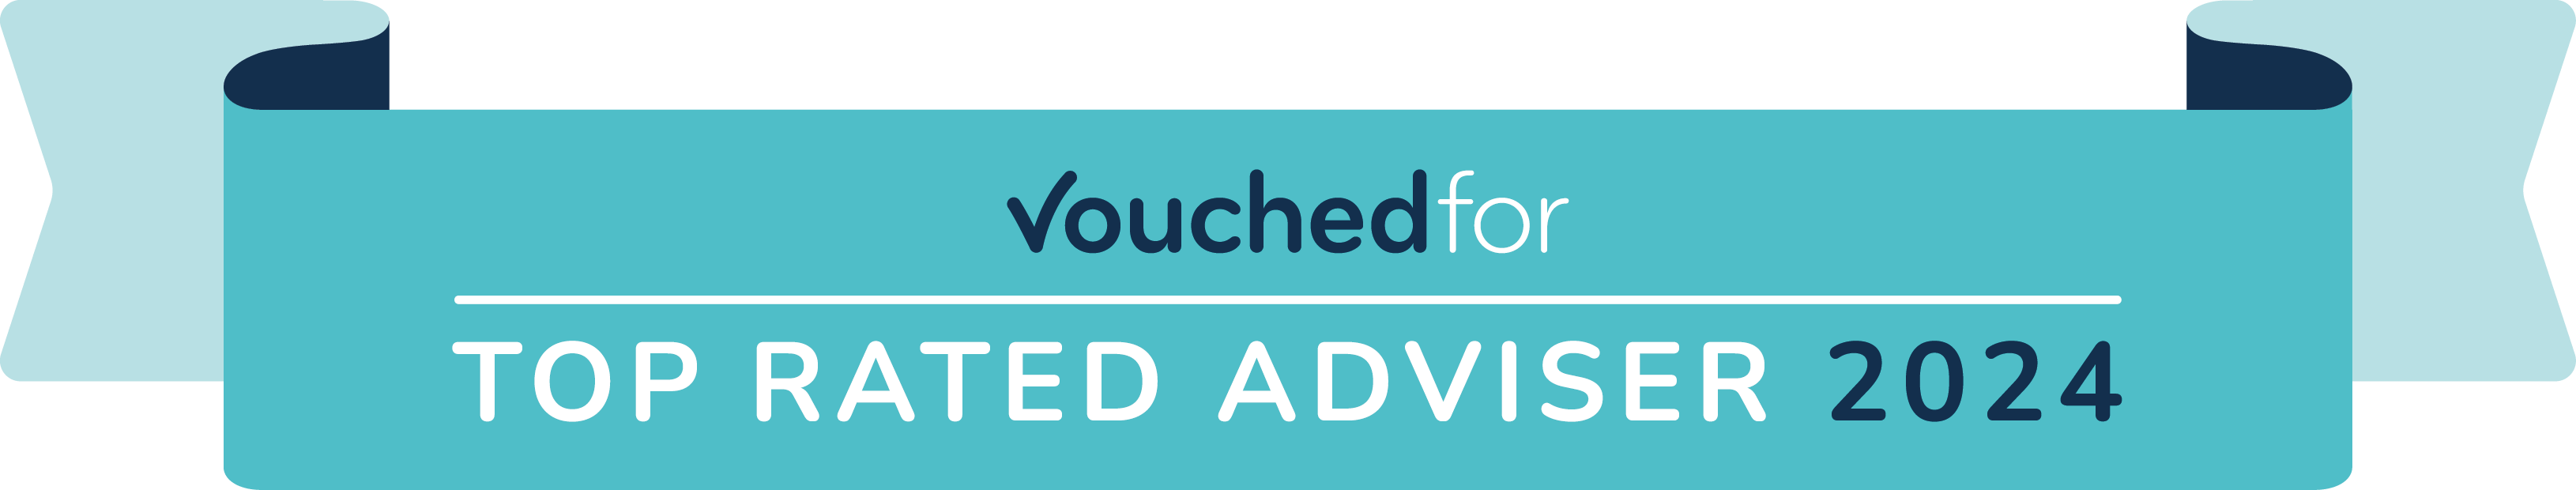 Vouched For UK Top Rated Adviser 2024